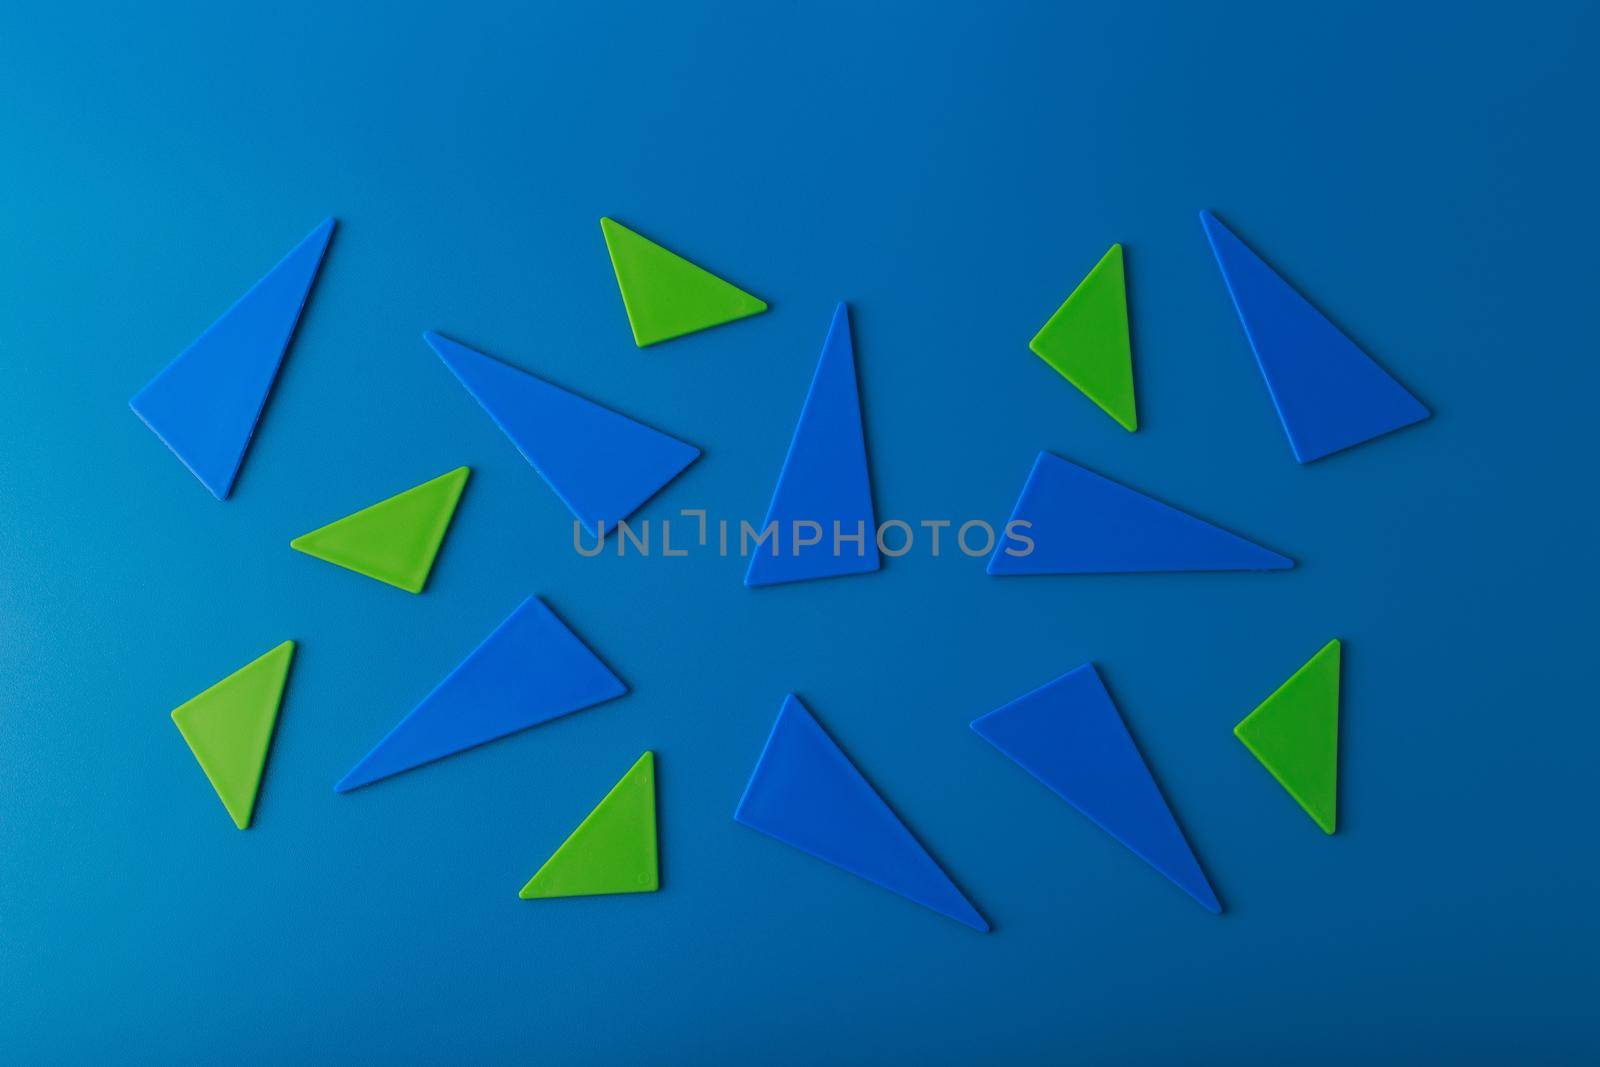 Minimalistic abstract flat lay with green and blue triangles on blue background. High quality photo